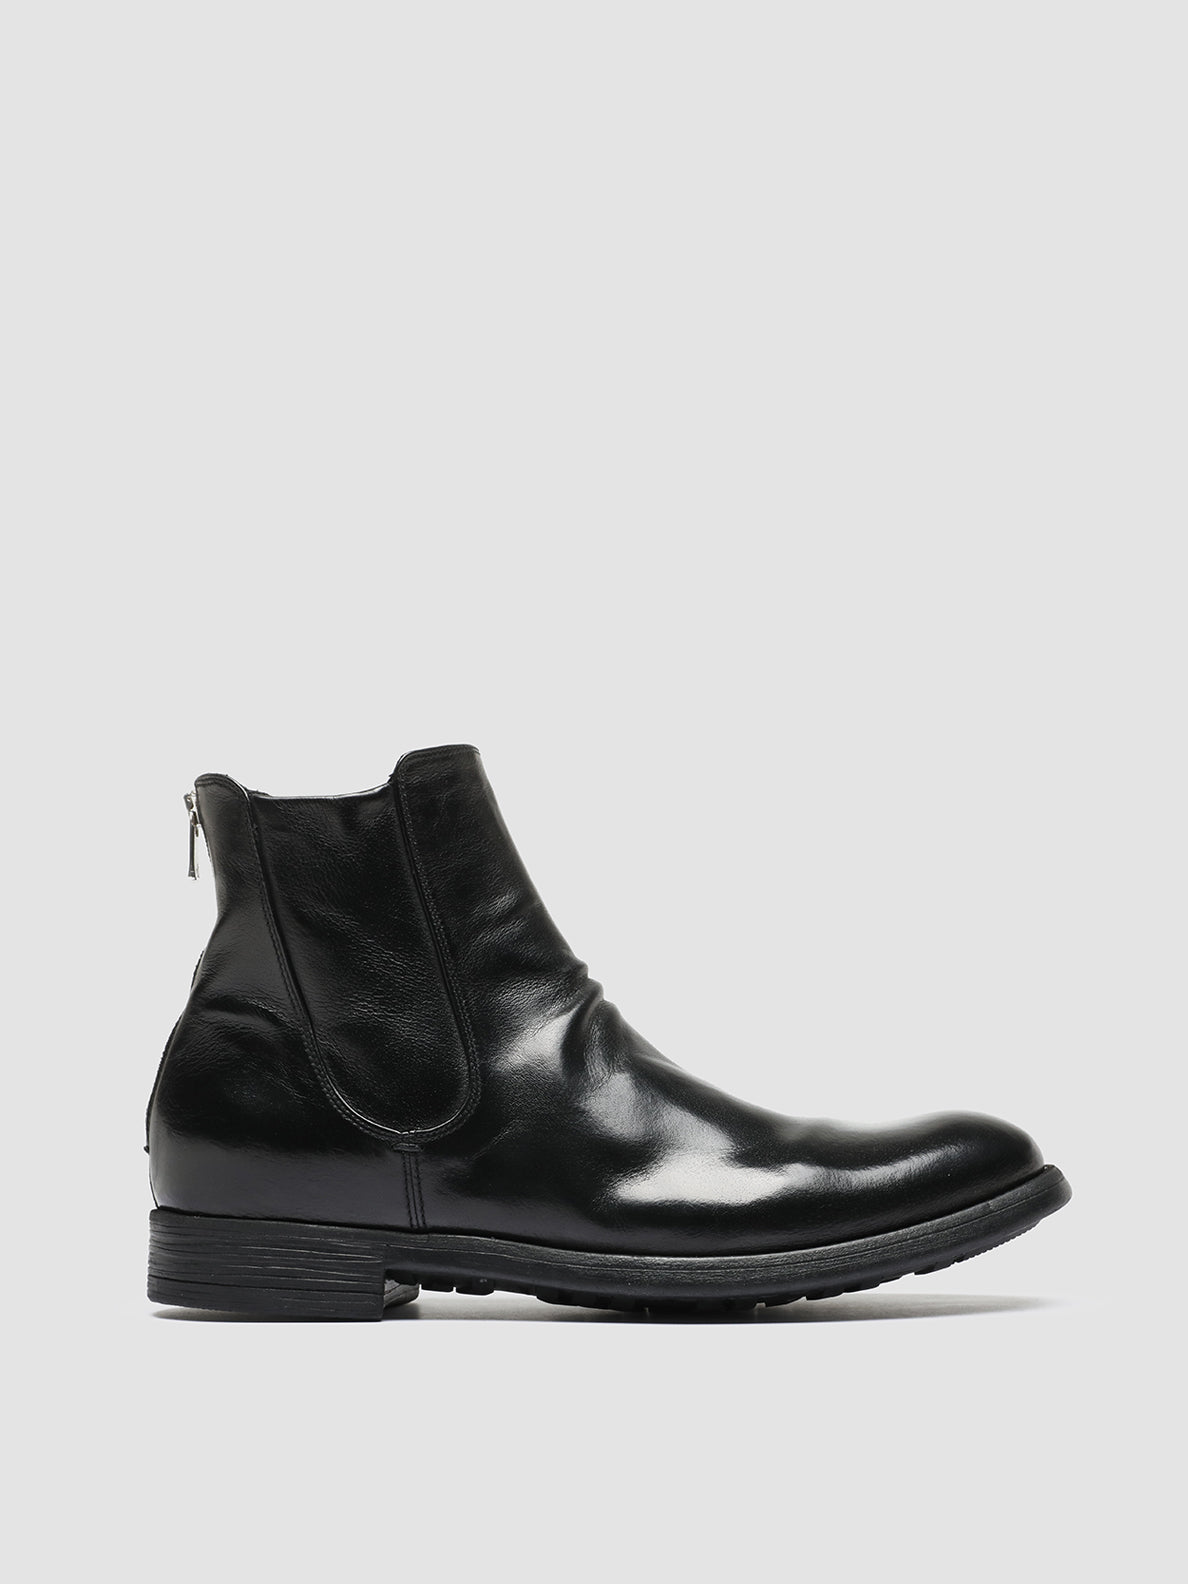 Men's Black Leather Boots CHRONICLE 059 – Officine Creative USA